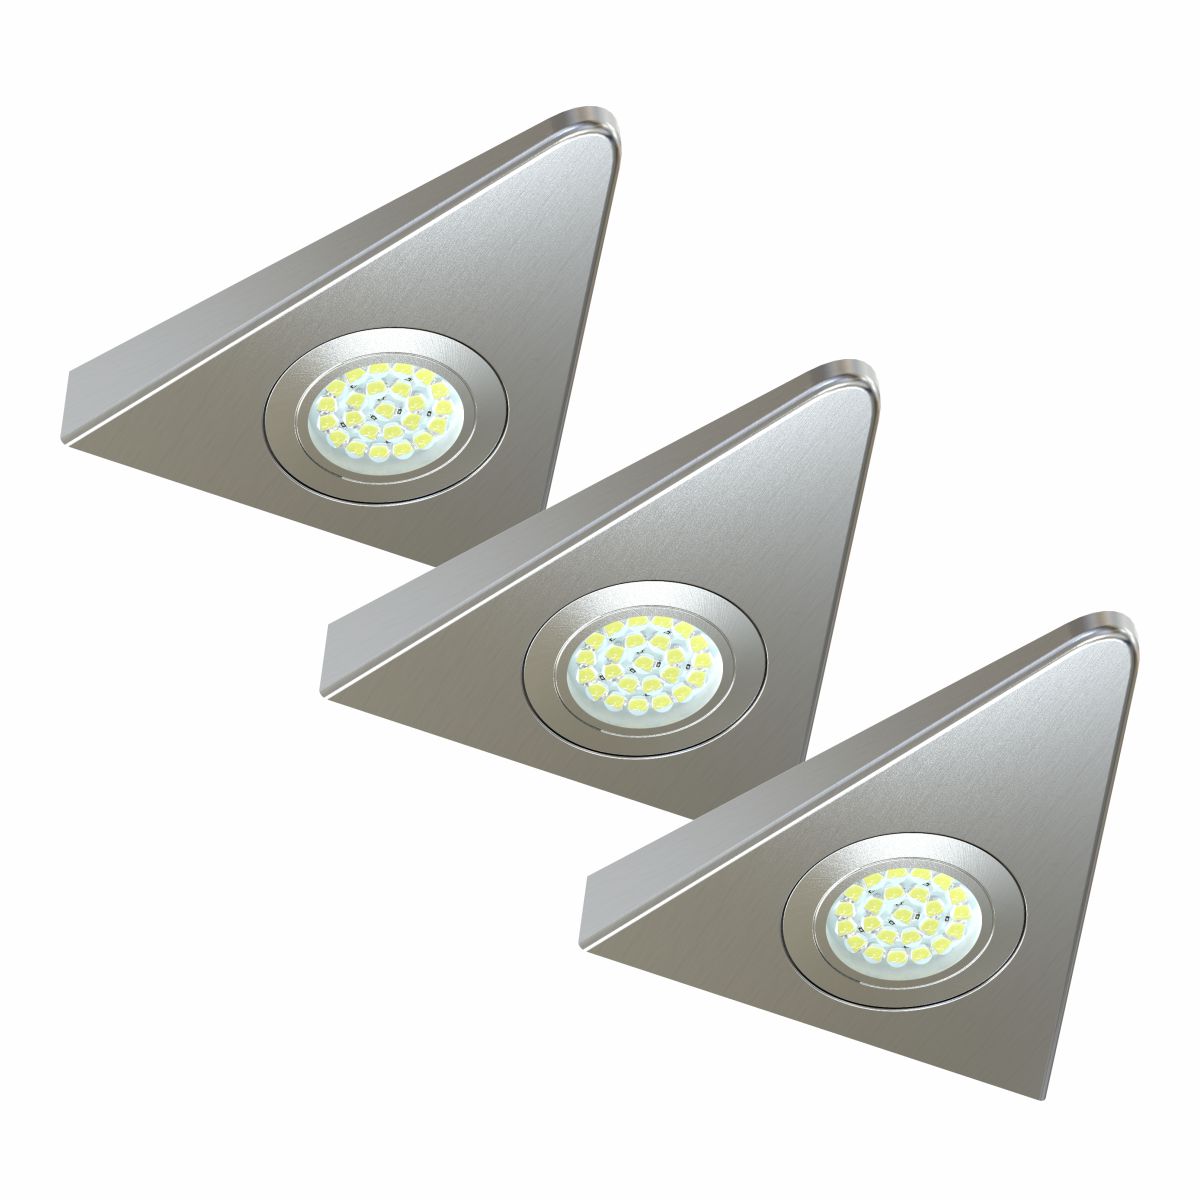 View Pack of 3 SuperSlim High Power 18w LED Triangle Cabinet Lights With Driver information